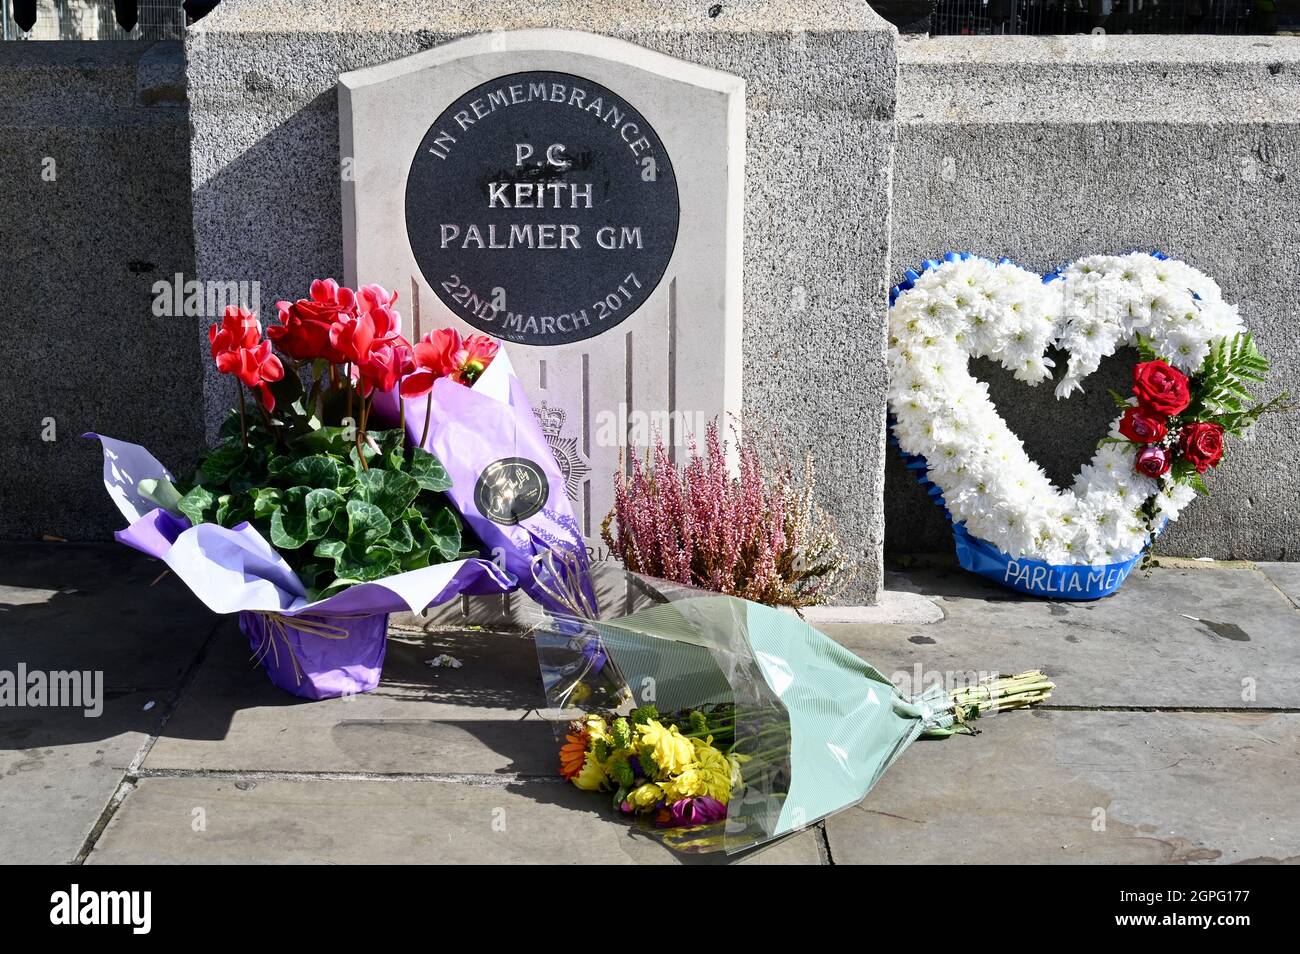 London, UK. Sept 29th 2021:On the approach of what would have been his 53rd birthday on 3rd October 2021, floral tributes were laid for PC Keith Palmer who was murdered during a terrorist attack on Parliament on 22.03.2017. PC Palmer was postumously awarded the George Medal, the second highest award for gallantry 'not in the face of the enemy'. Houses of Parliament, Westminster. Credit: michael melia/Alamy Live News Stock Photo